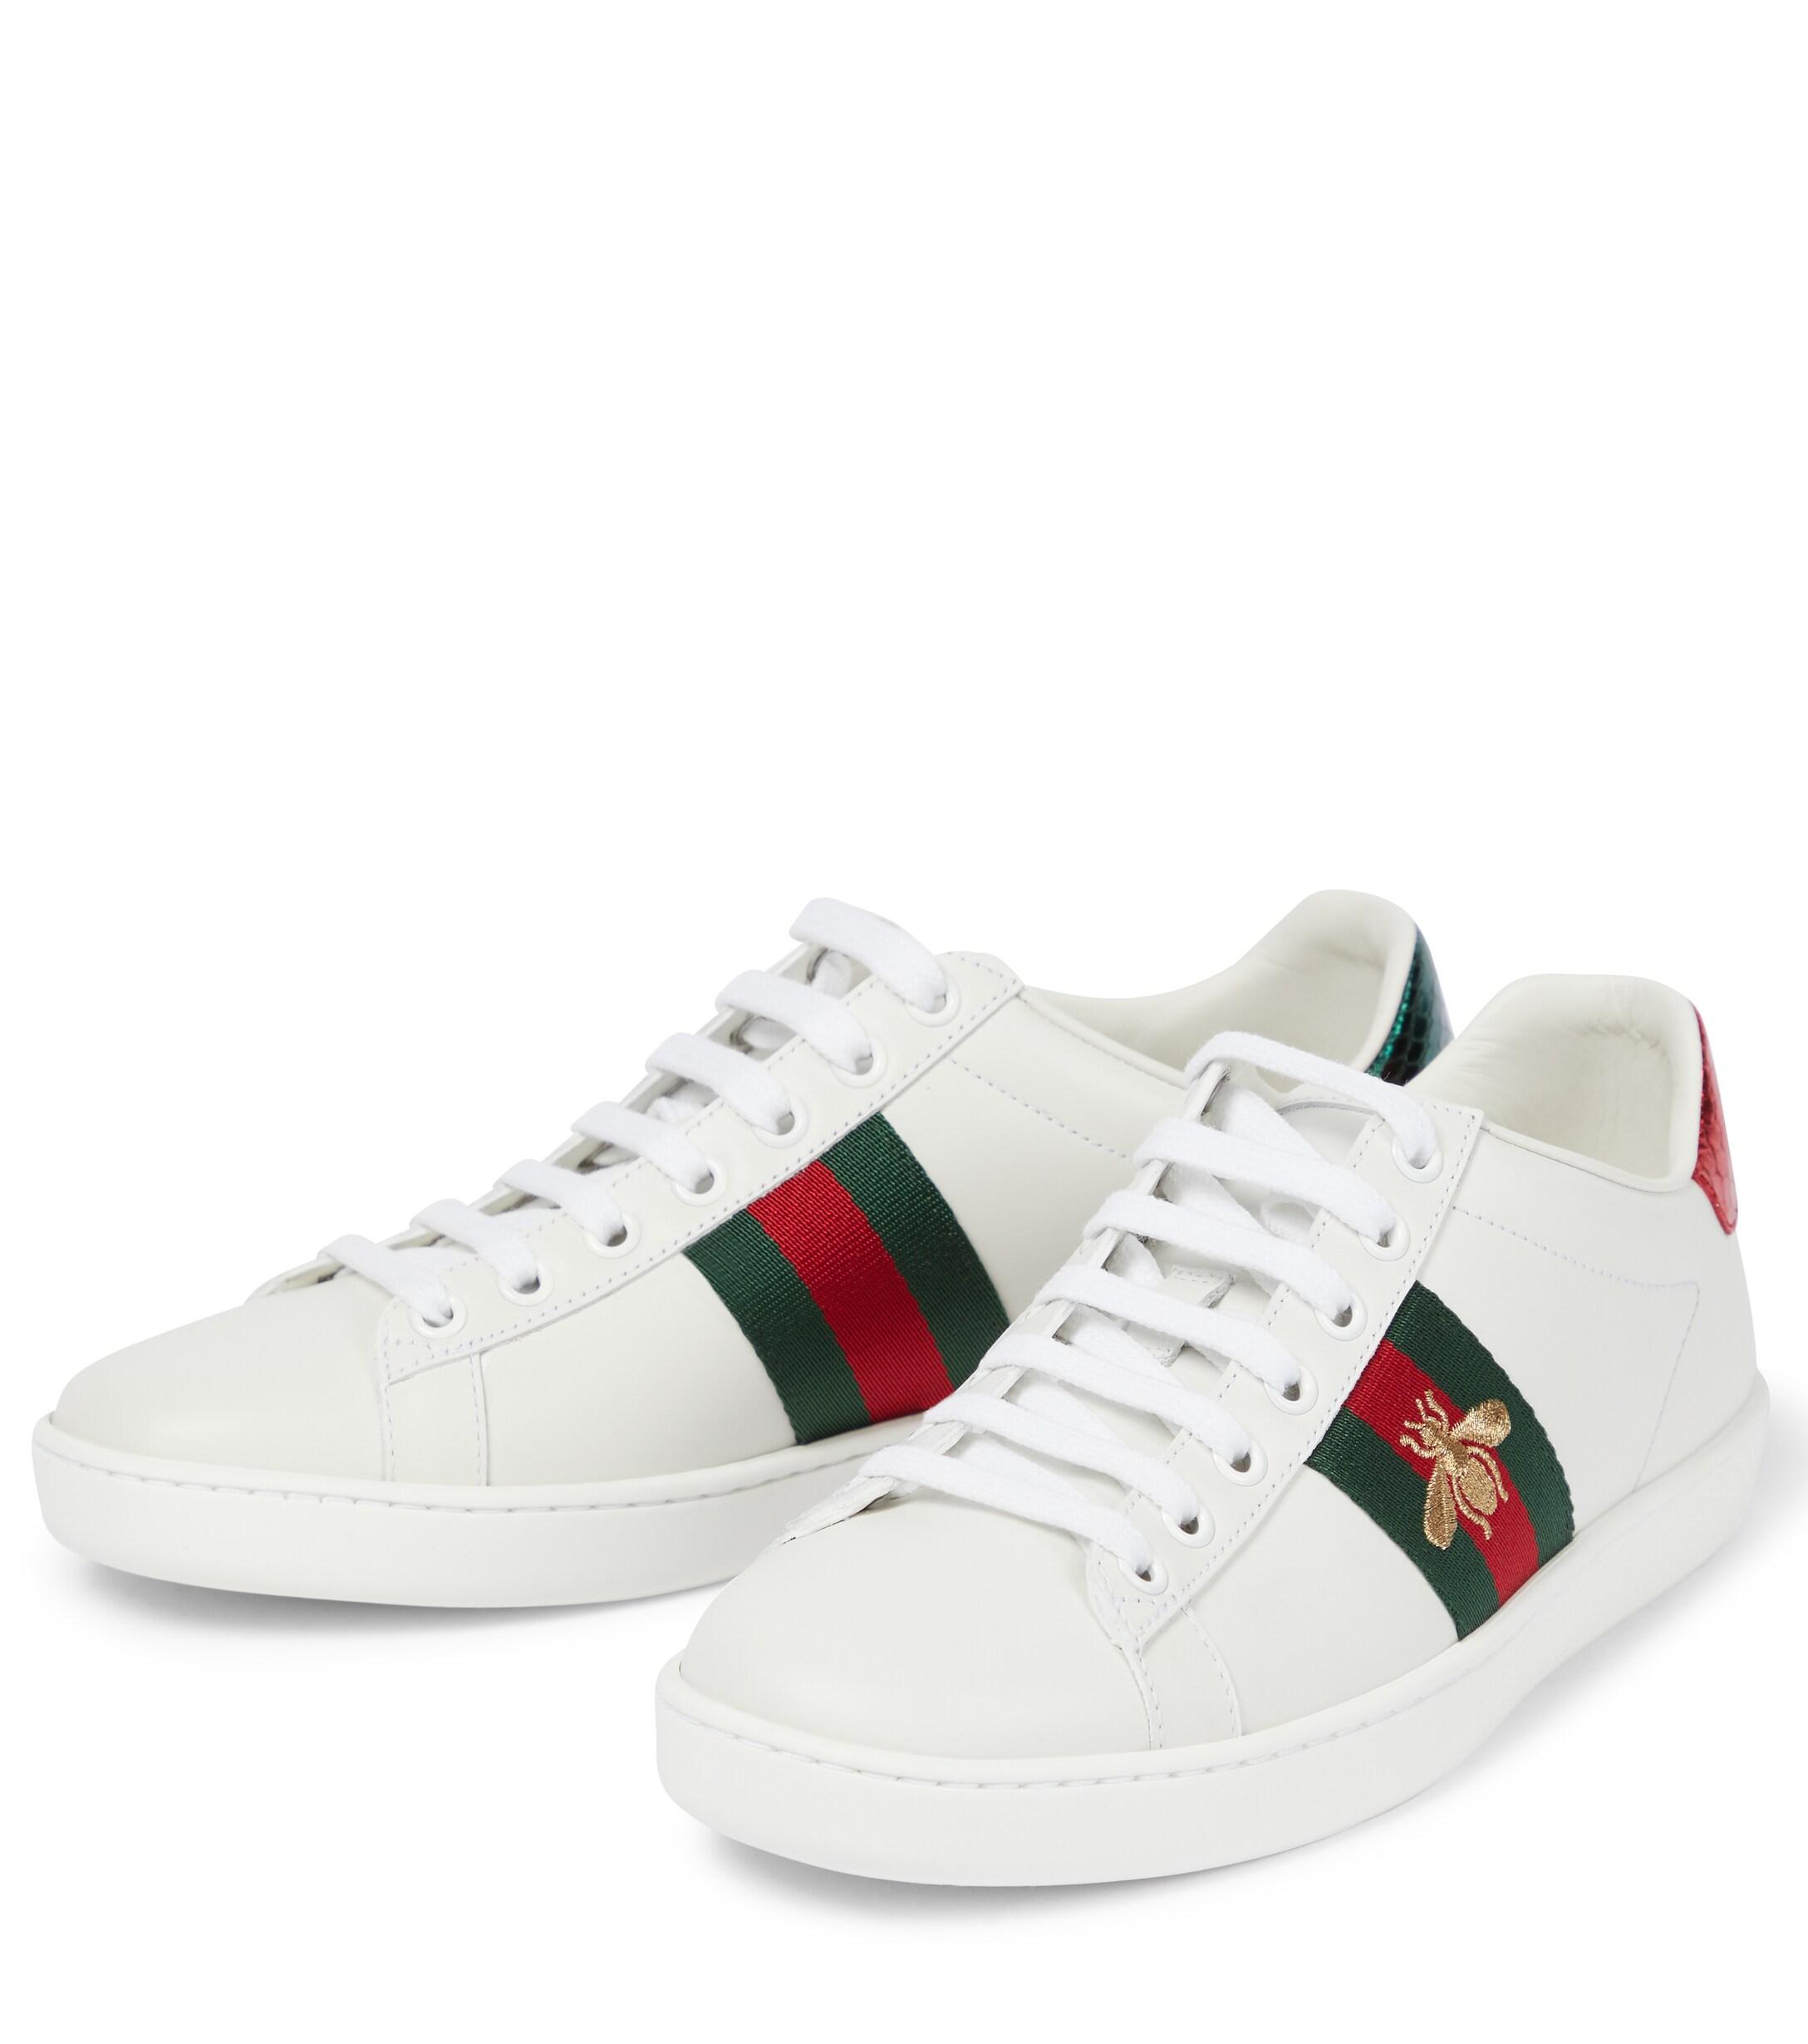 Gucci Leather New Ace Bee Embroidered Sneakers in Soft Sand (White) - Save  34% - Lyst